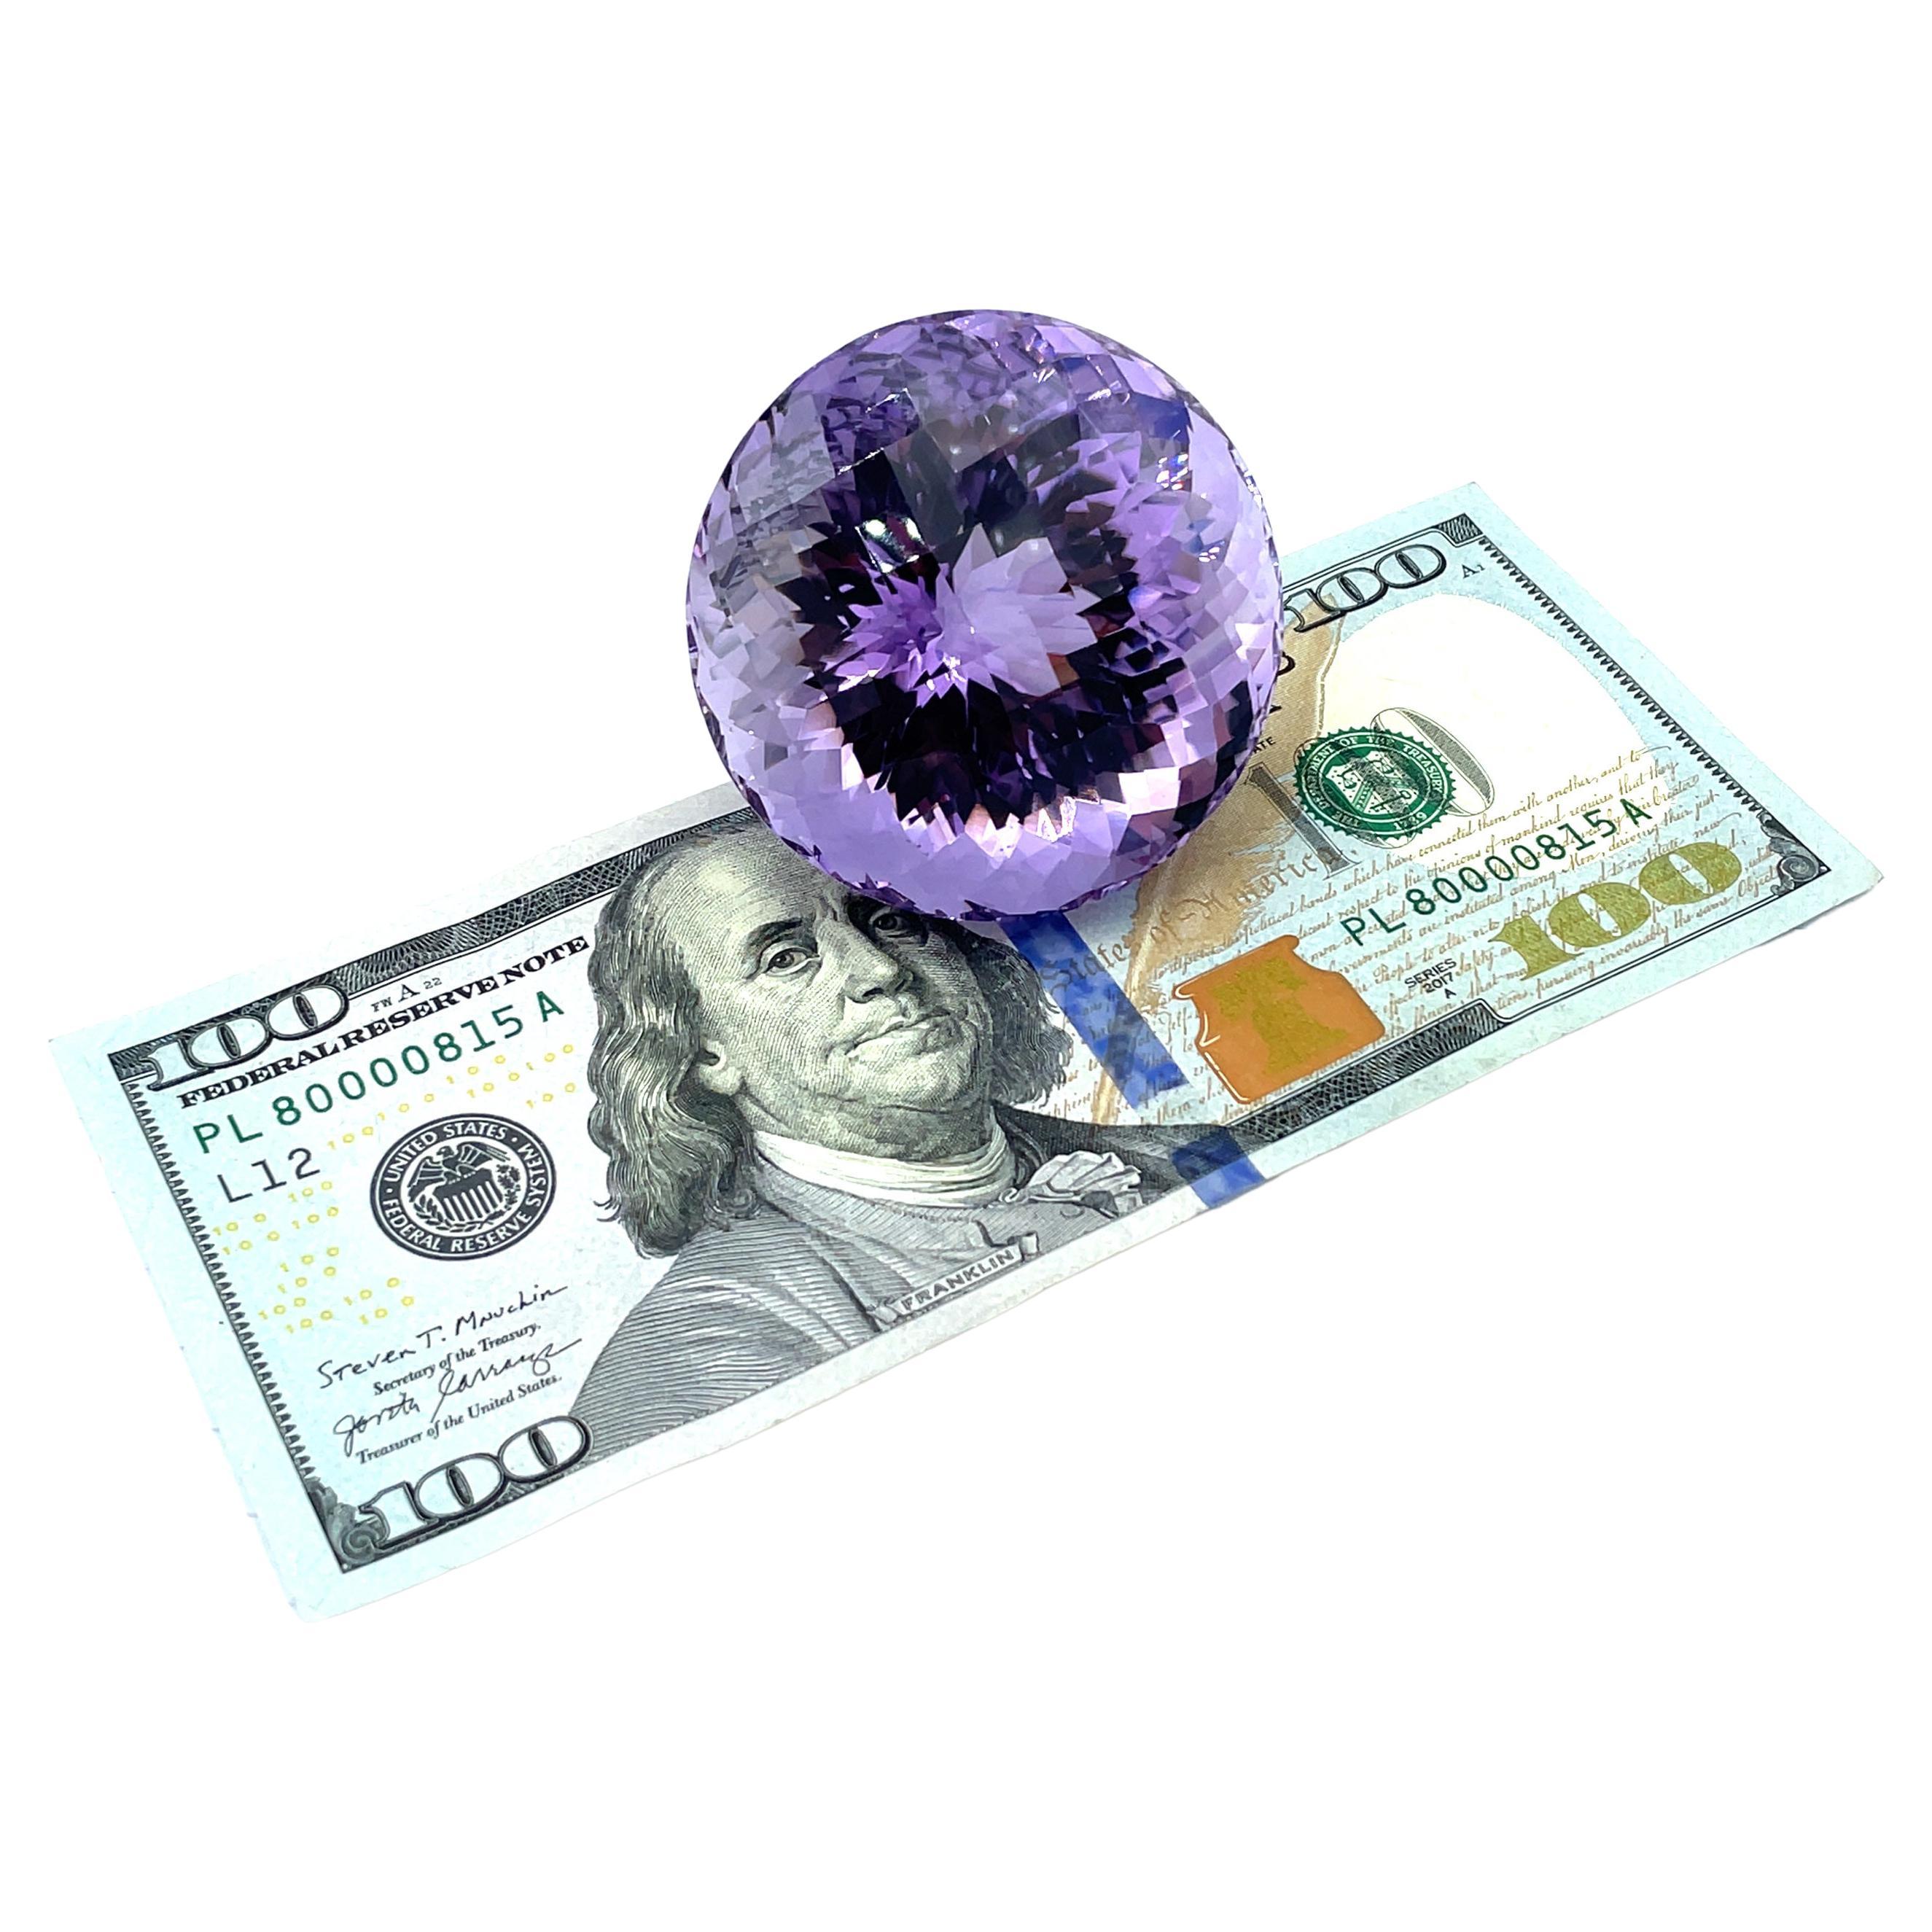 This is a perfect gift for the person who has everything! This stunningly beautiful, round amethyst gemstone weighs a whopping 651 carats and would make a breathtakingly impressive desk accessory. The top of the gemstone, aka the 